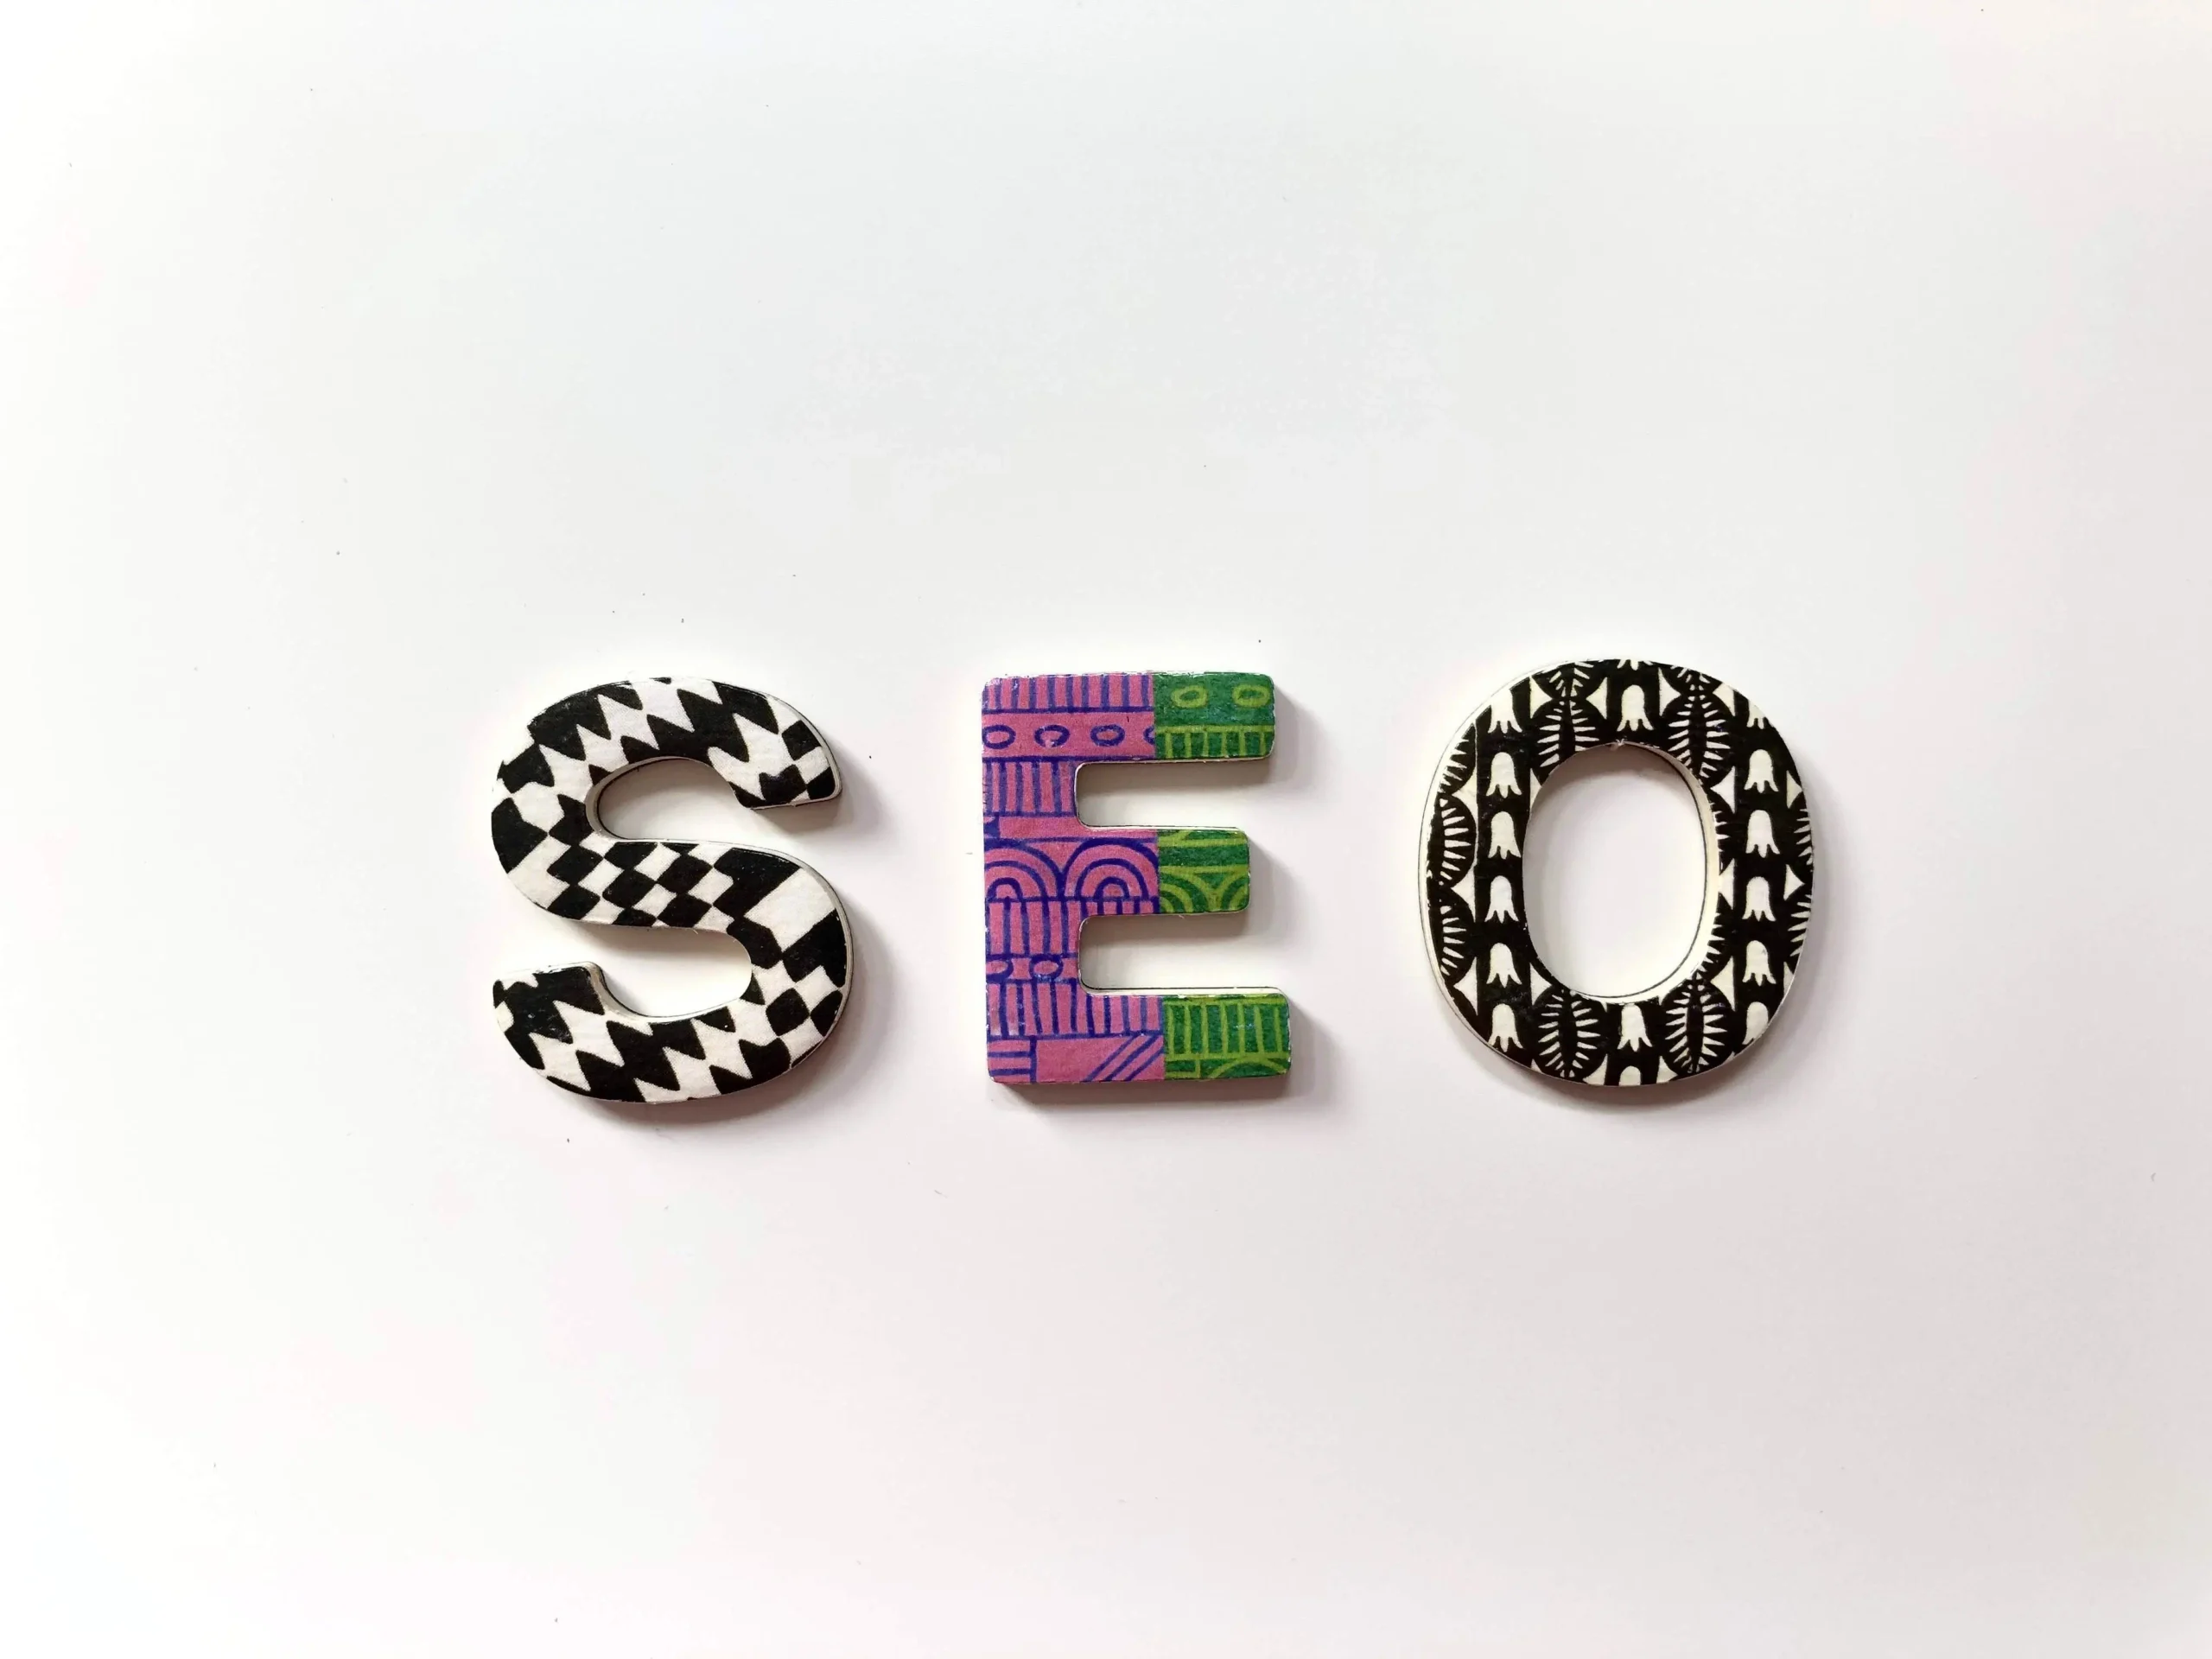 SEO spelled out in a visual way